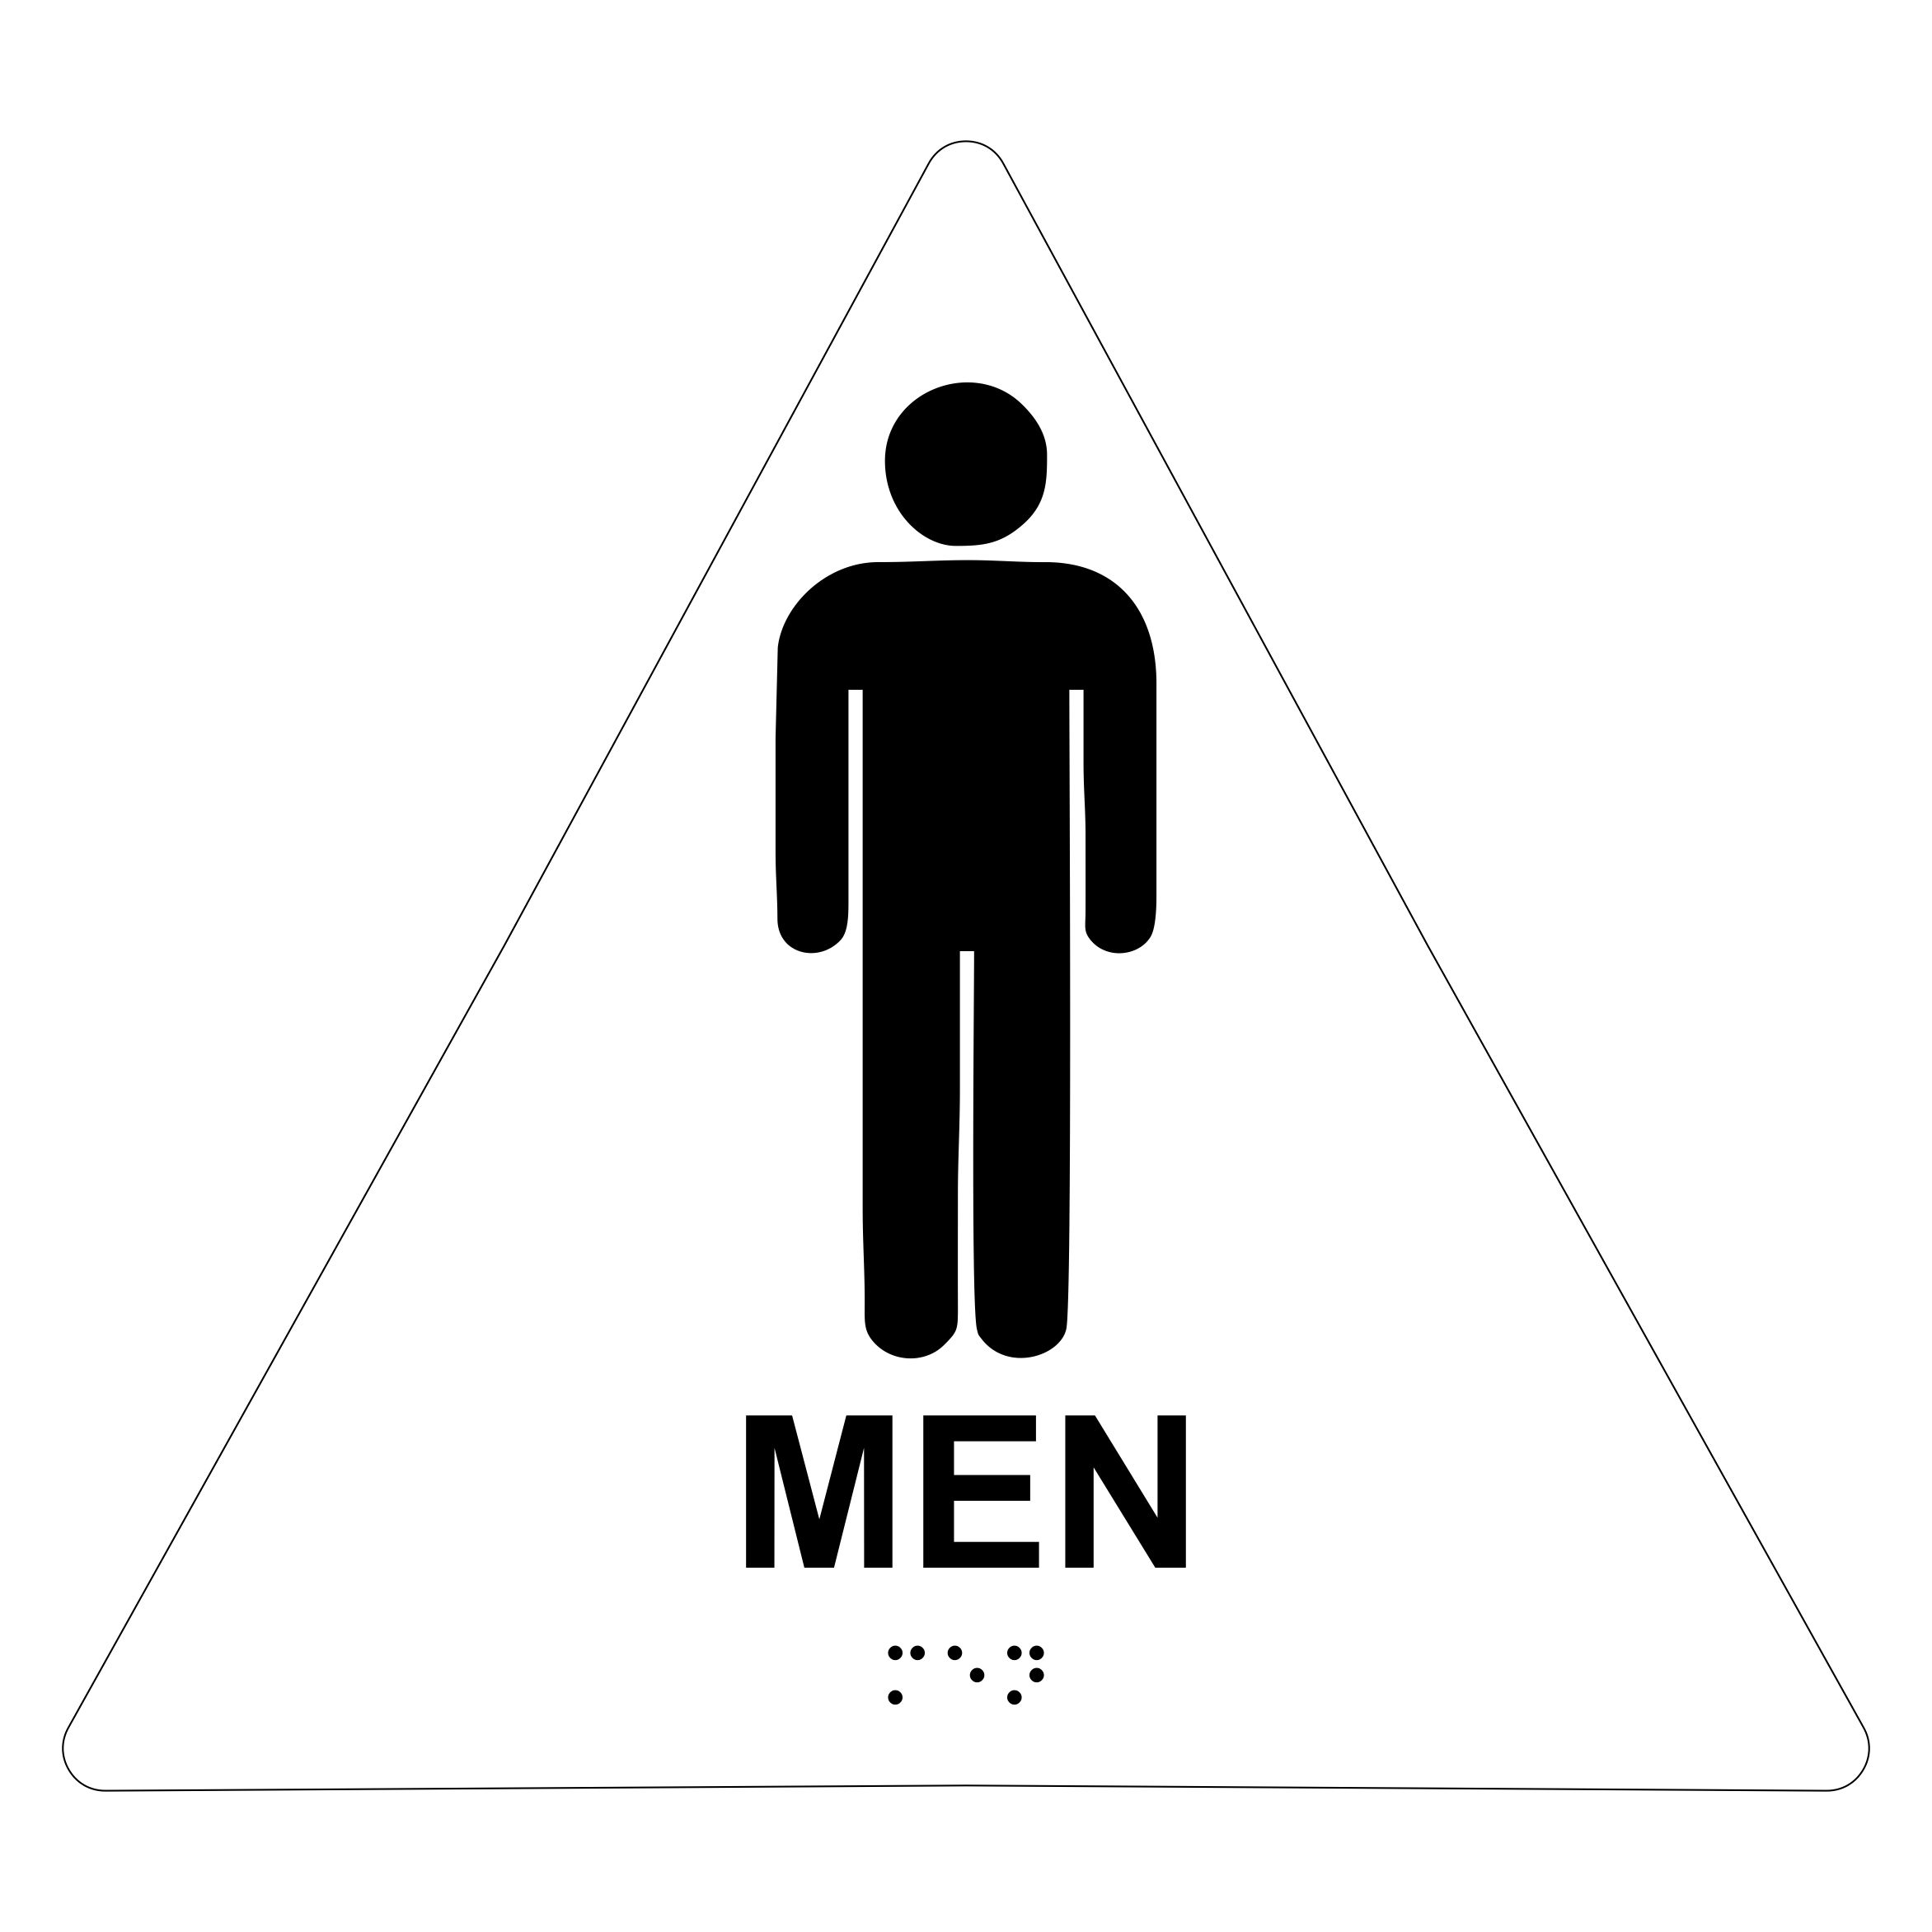 Men Restroom Identification Sign by GDS Architectural Signage TCO Inspection Certified Raised Icons Wheelchair Accessible Brushed Aluminum Raised Braille ADA Compliant Bathroom Sign 